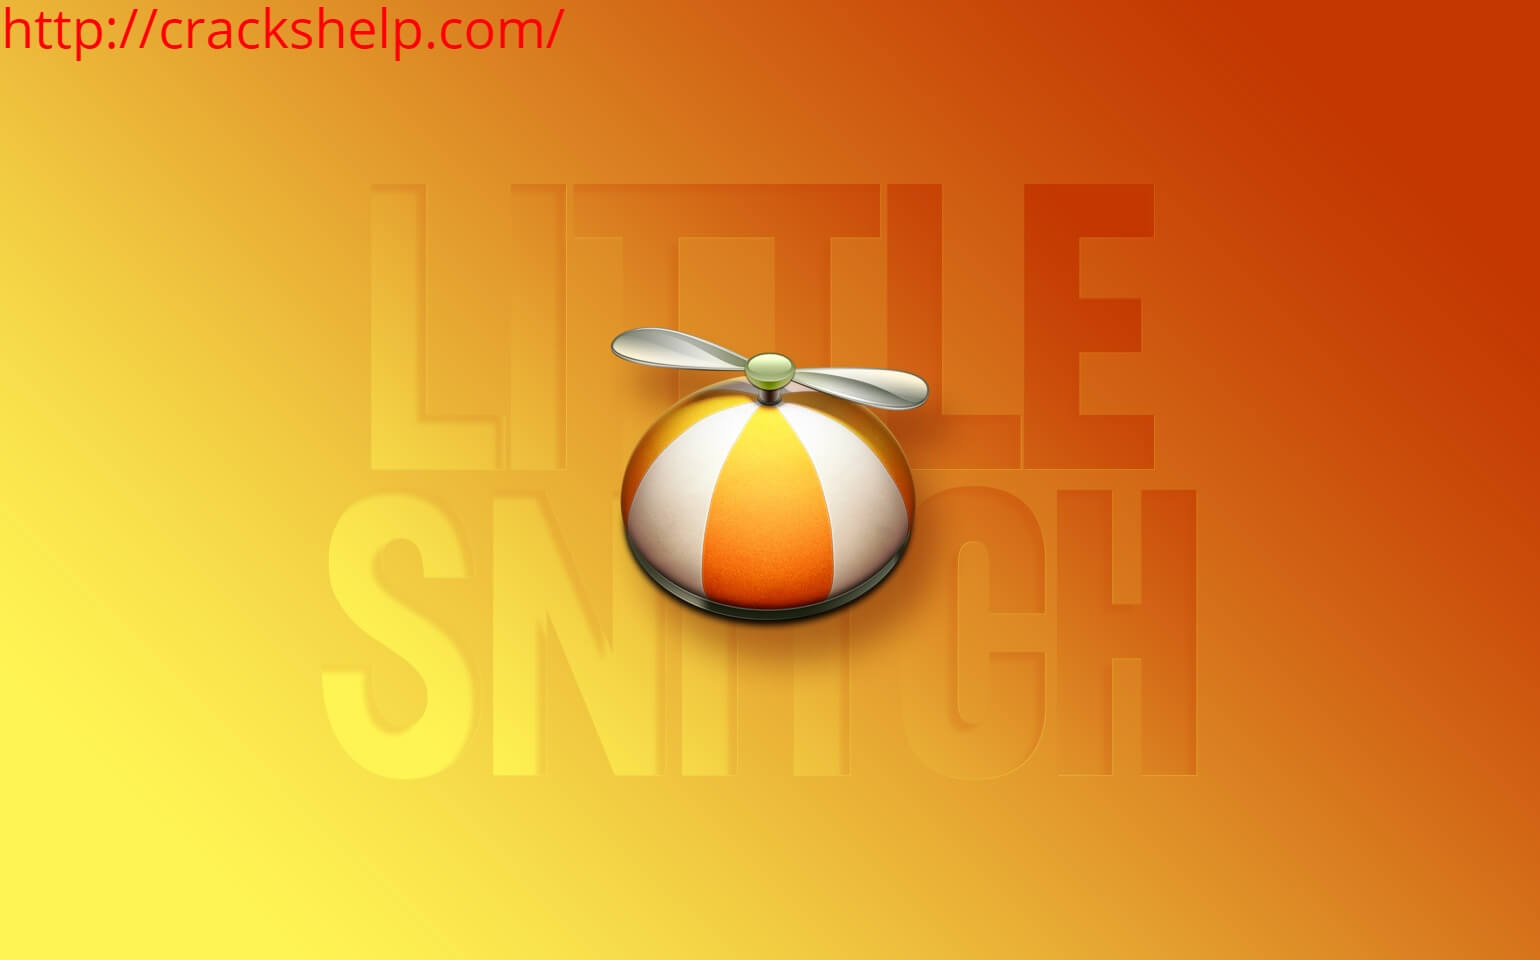 Little Snitch Crack 5.3.1 With Activation Key Free [Win/Mac] 2022